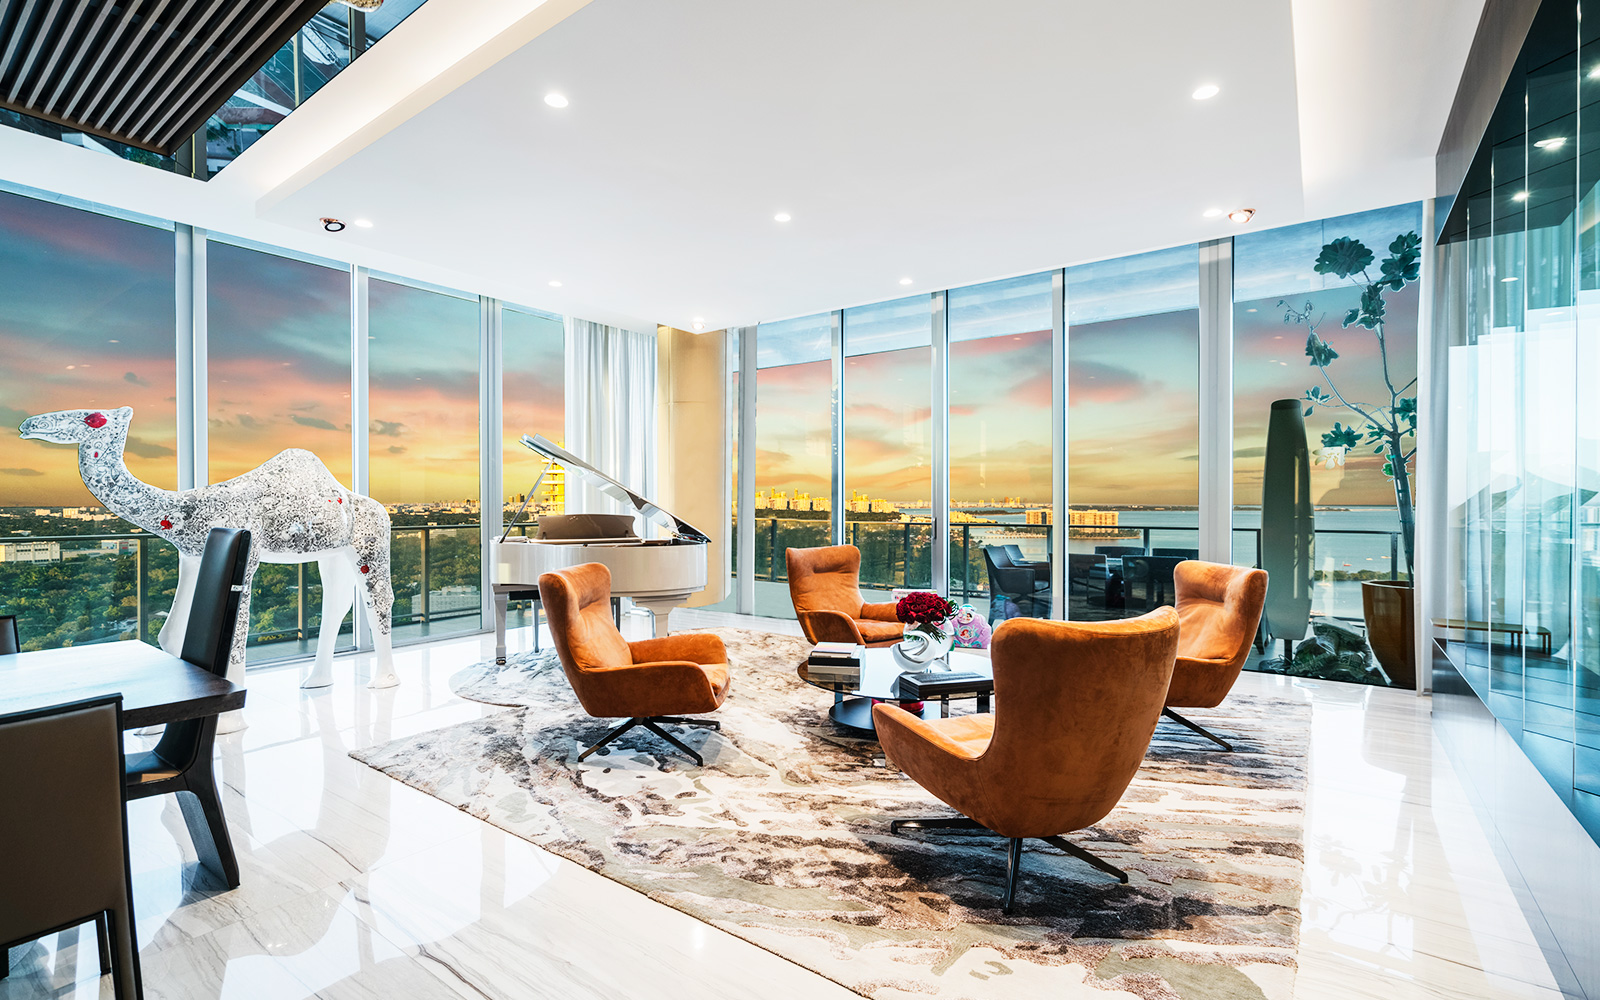 Mexican Mogul Sells Coconut Grove Penthouse for Record $19M